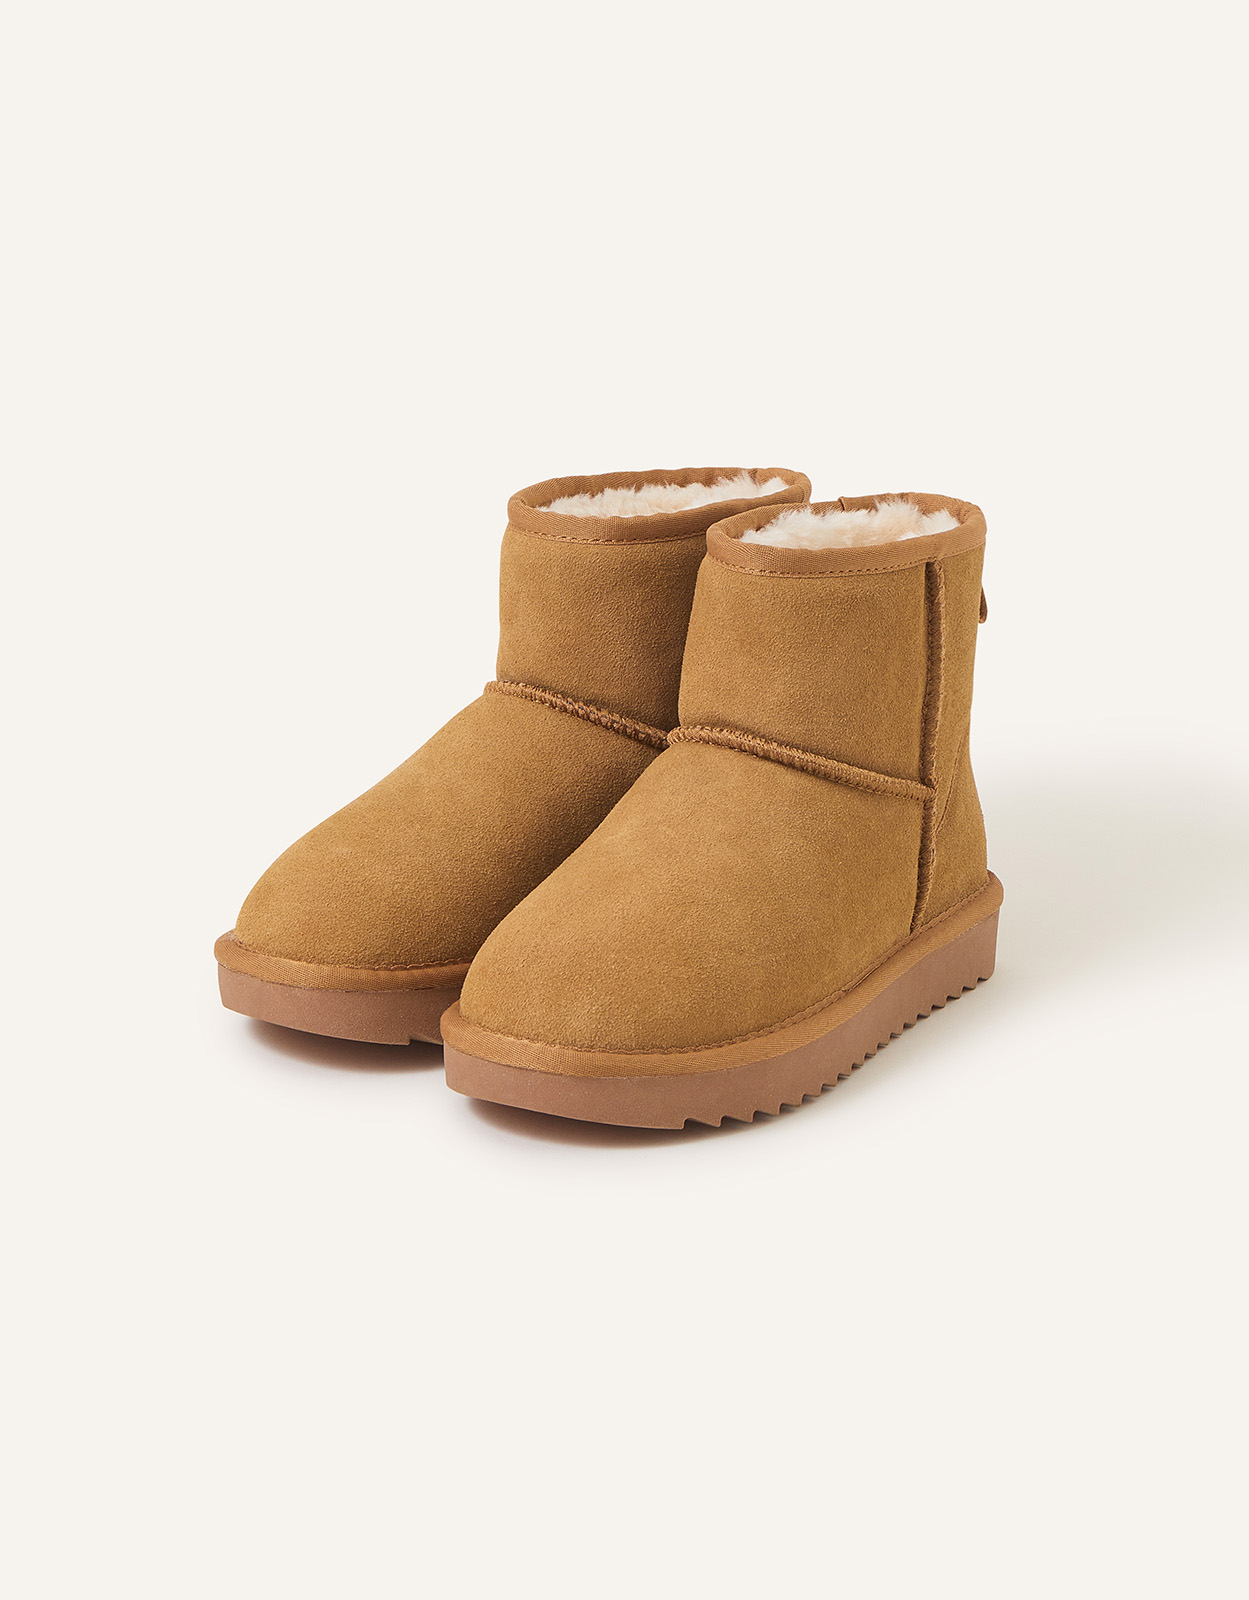 Accessorize Mid Suede Boots Tan, Size: 39